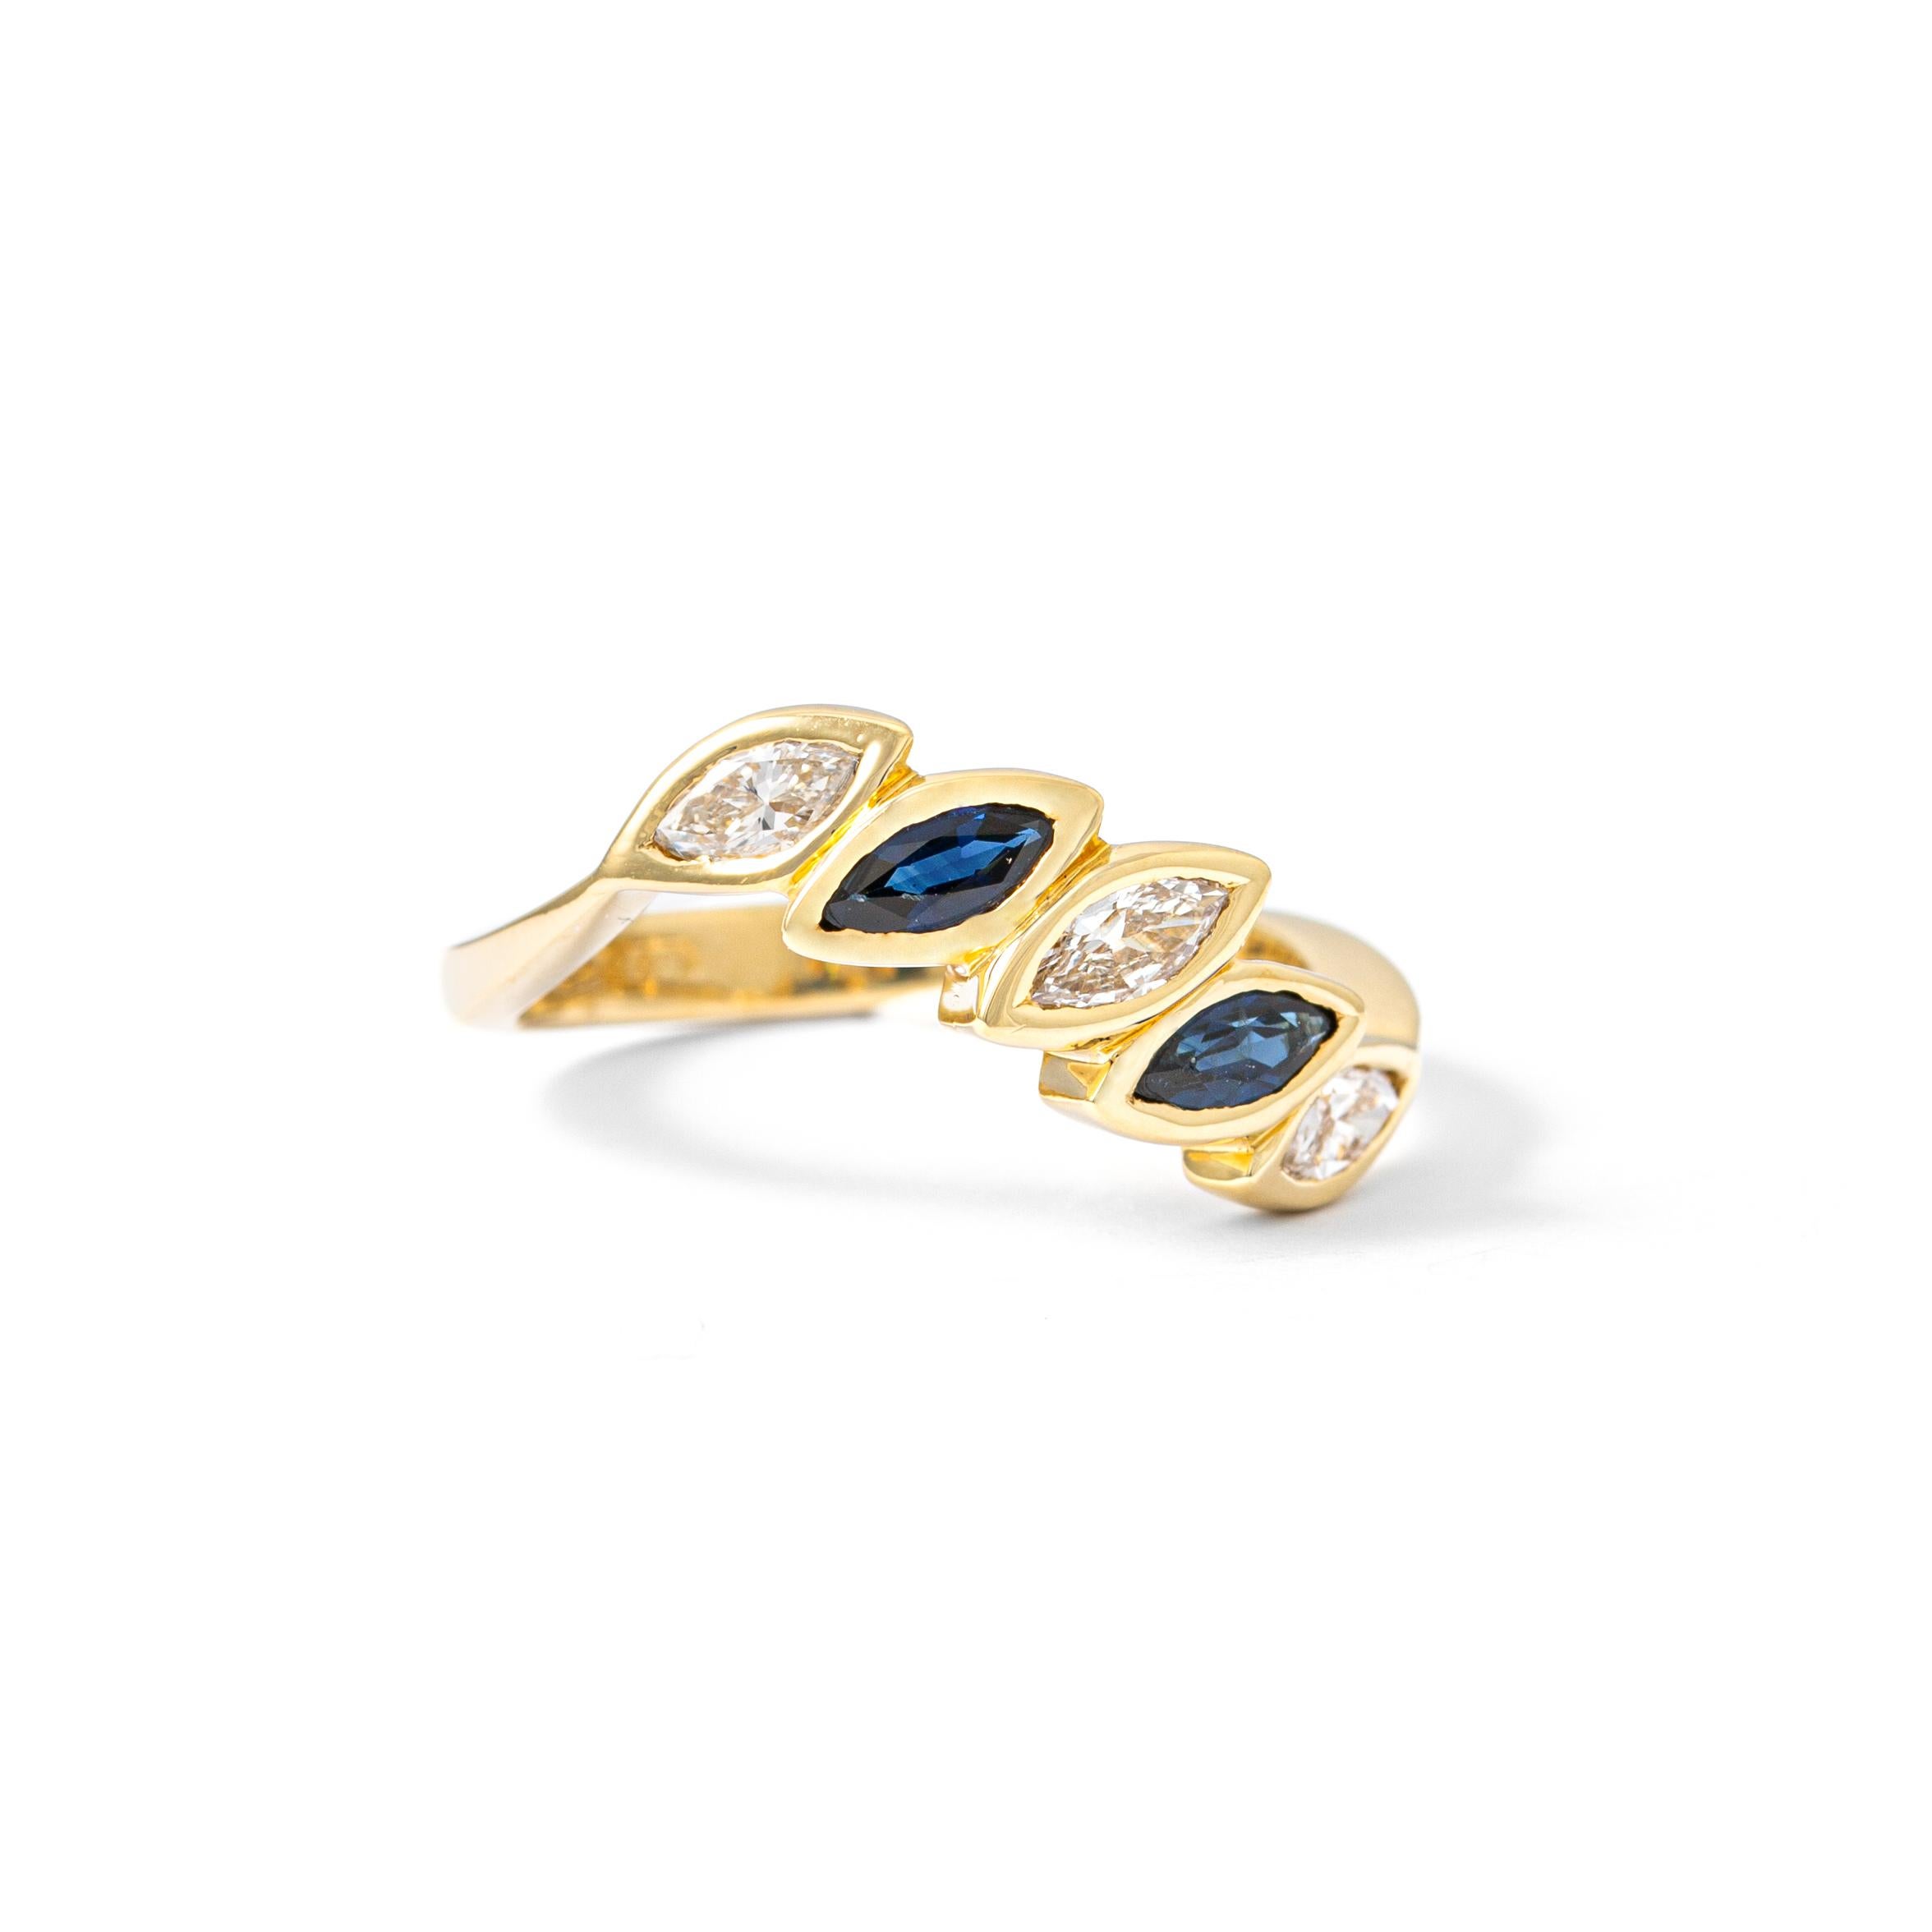 Ring in 18kt yellow gold set with 2 marquise cut sapphires 0.55 cts and3 marquise cut diamonds 0.51 cts Size 53